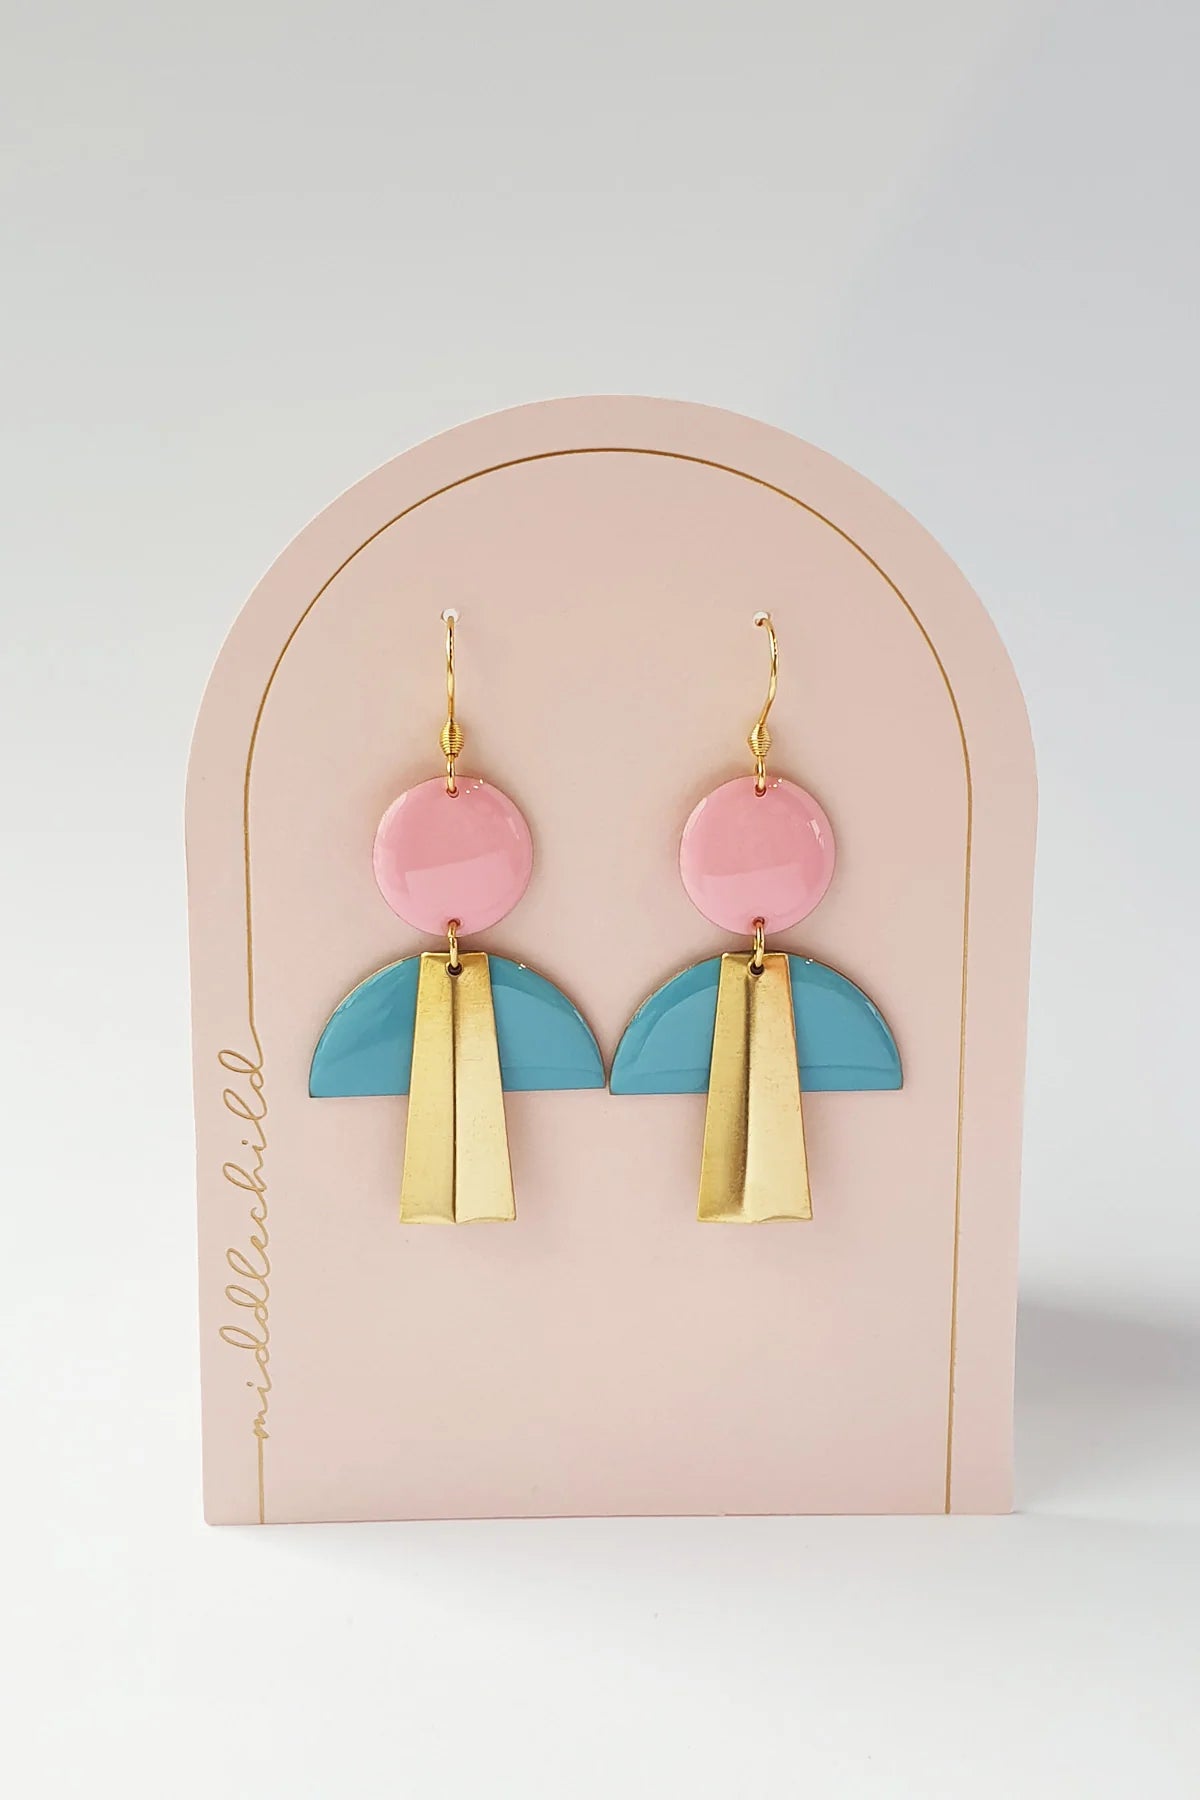 Middle Child - Formation Earrings